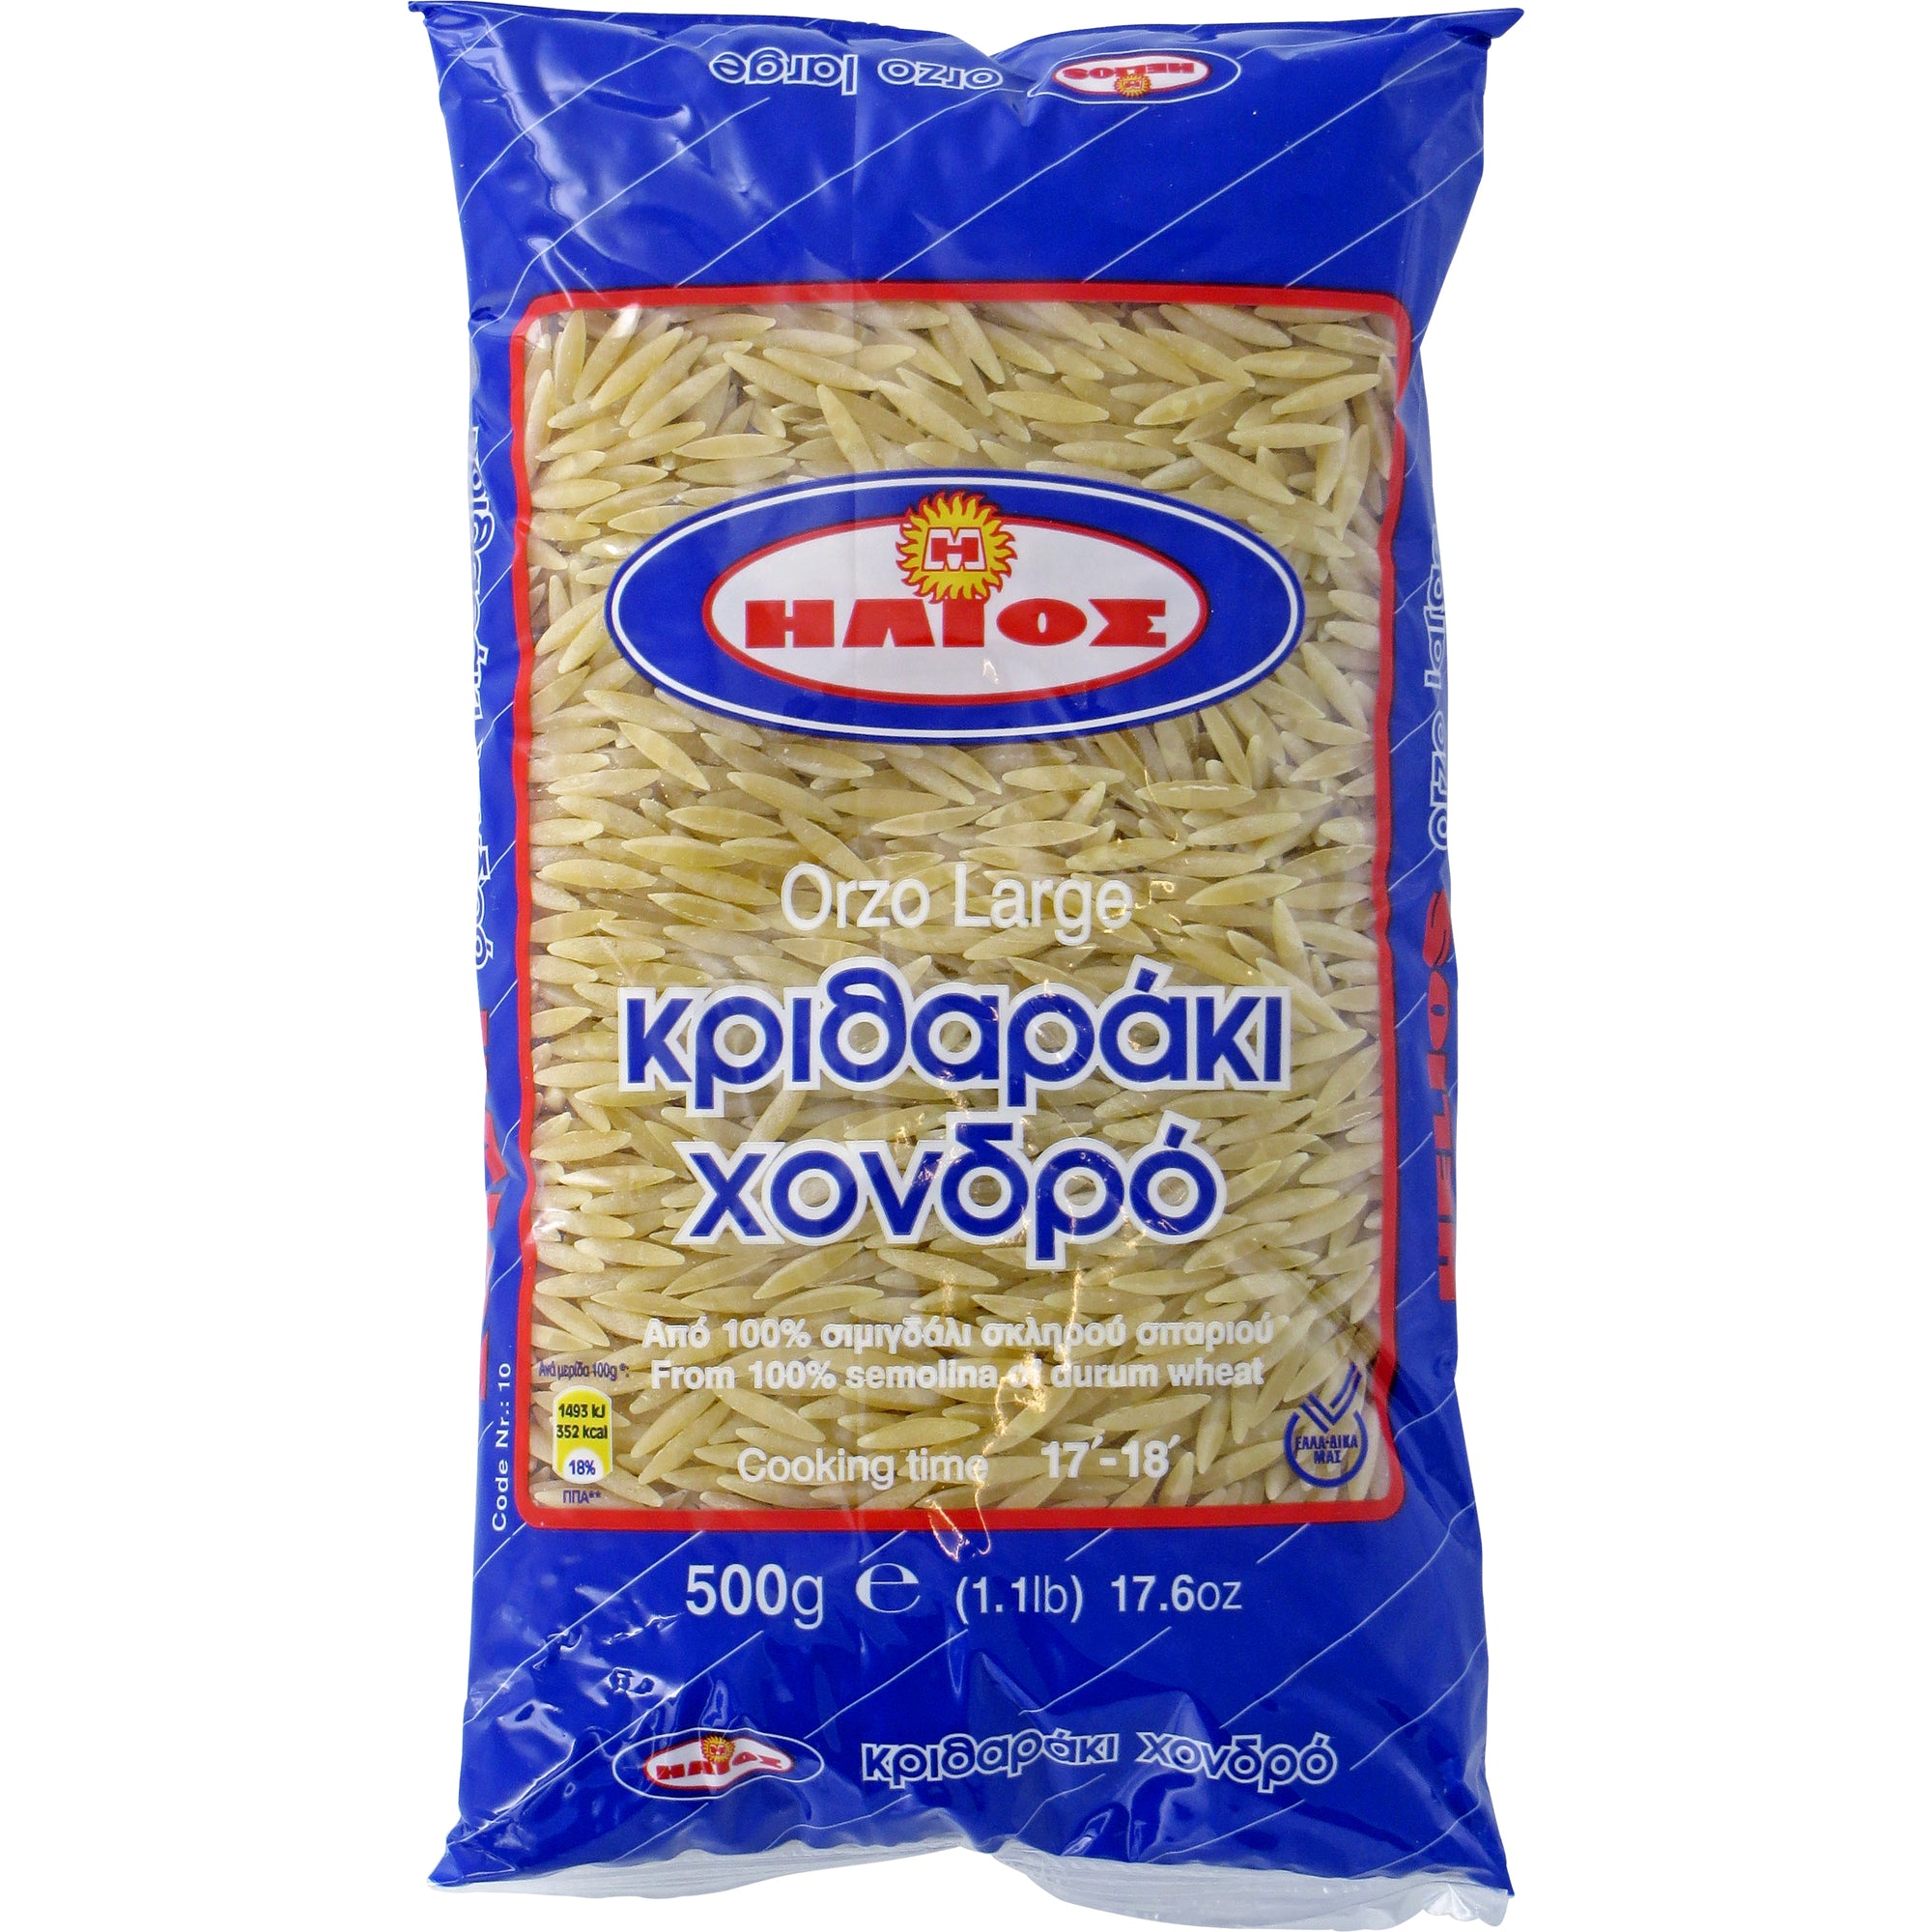 'Helios' Orzo Large 500g